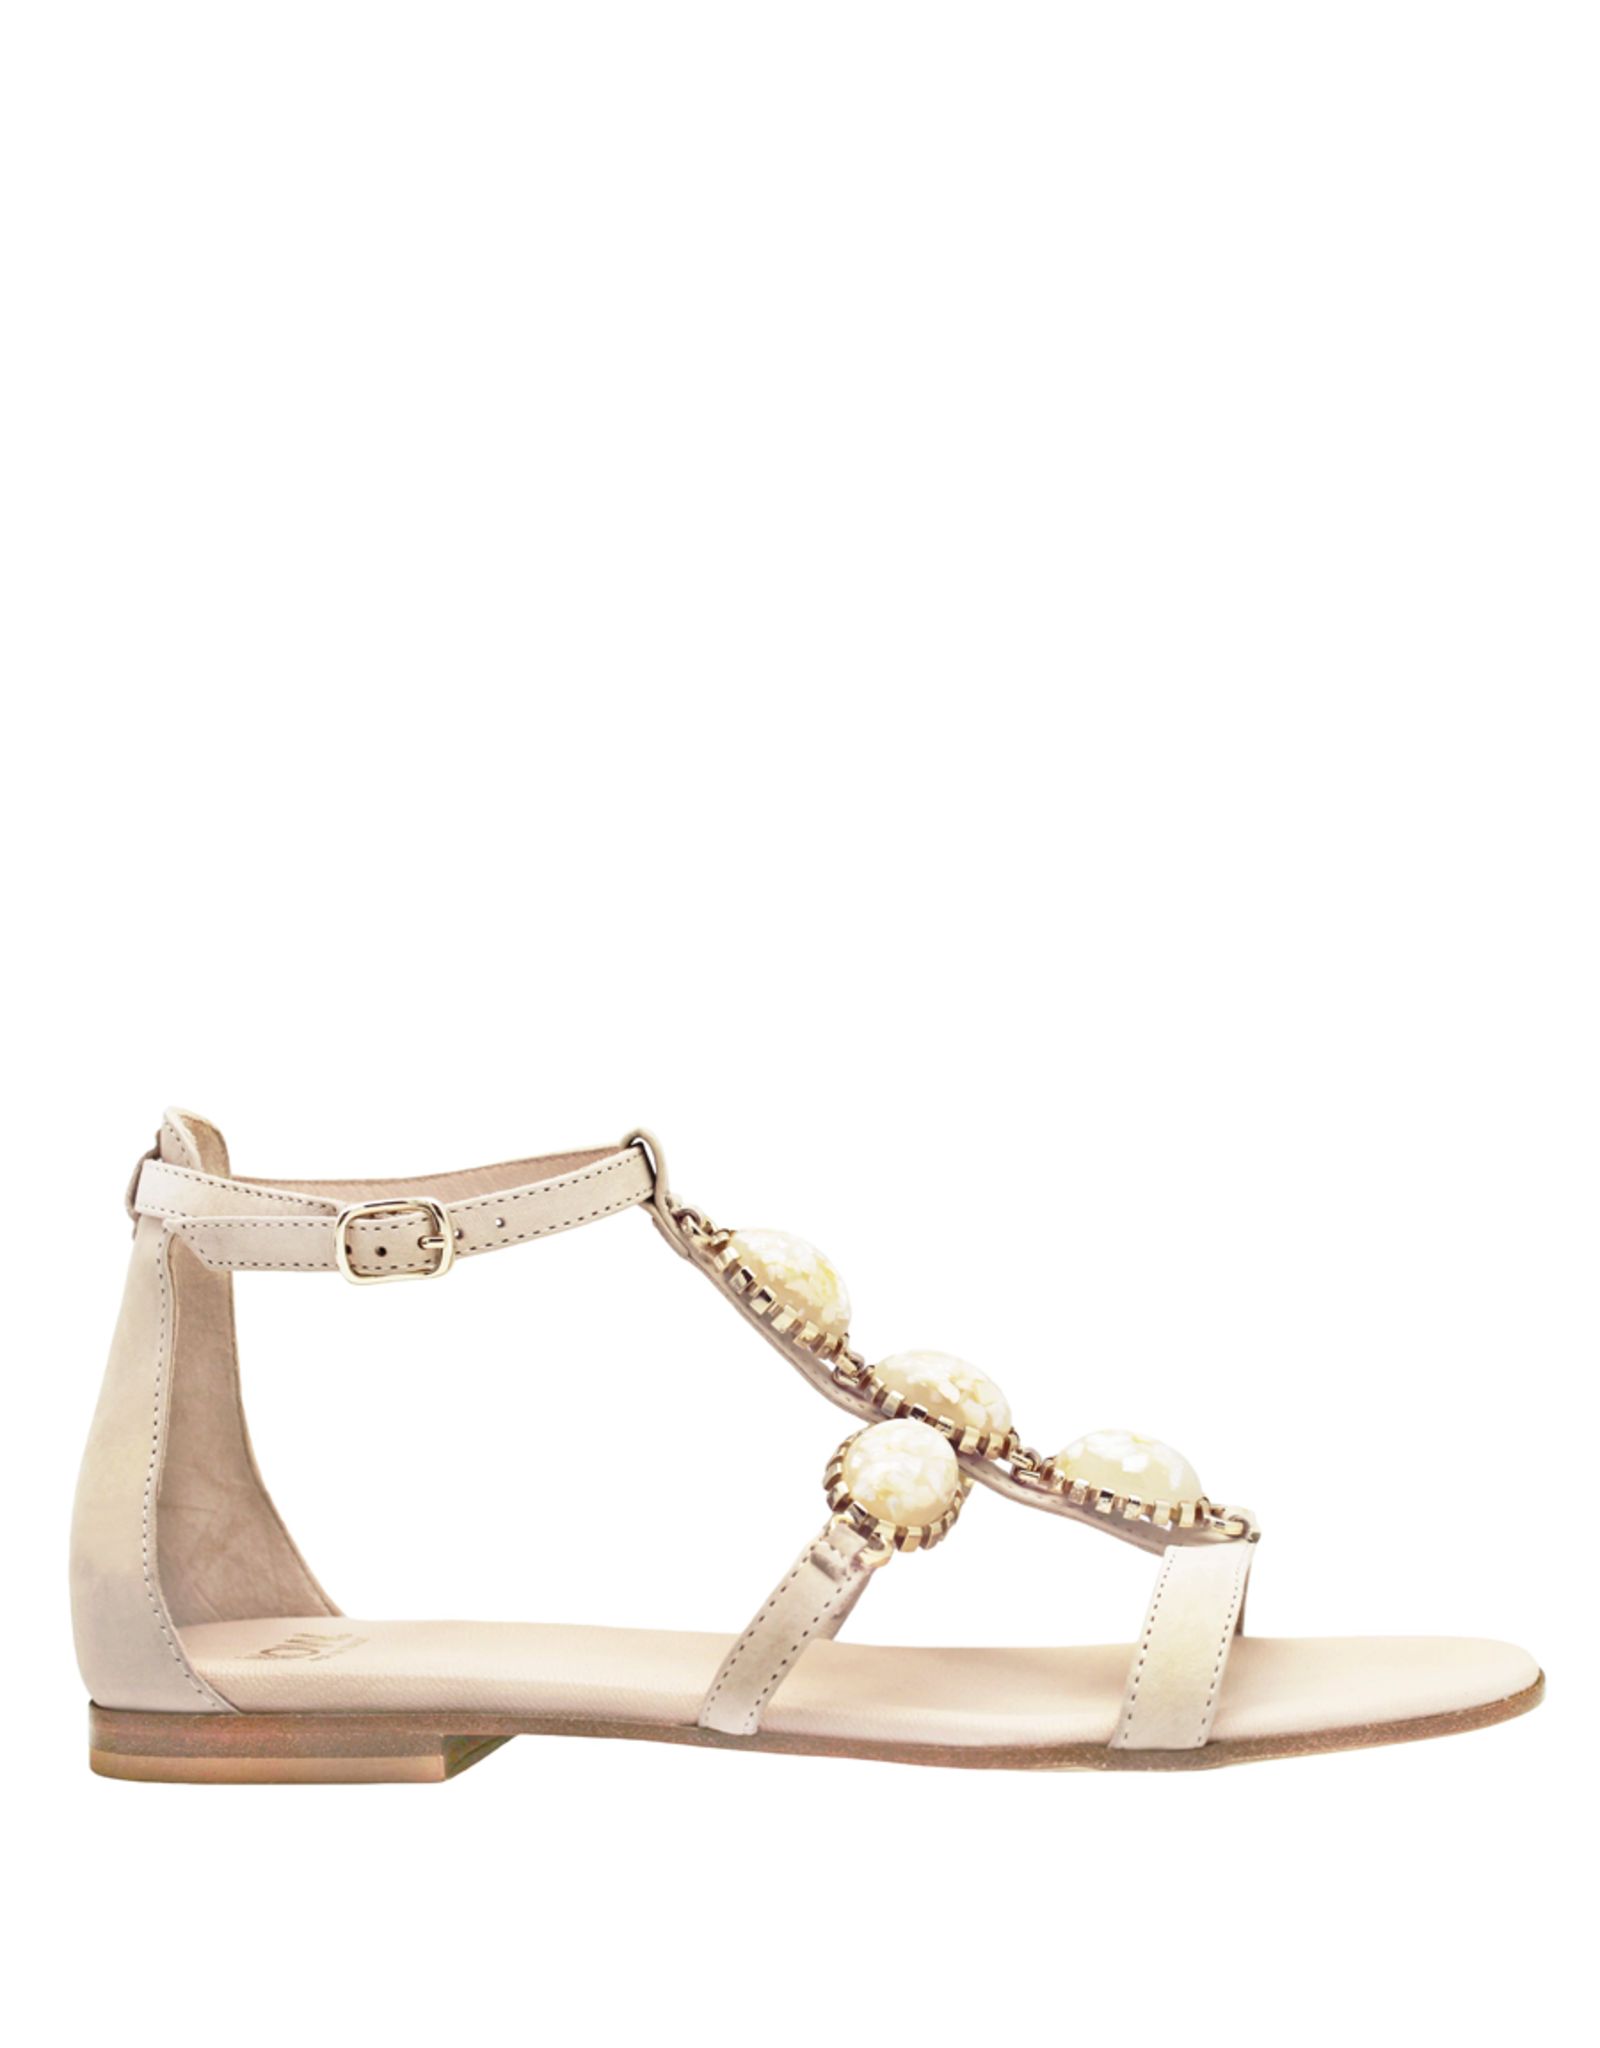 Now Now Shell T-Strap Sandal 7488